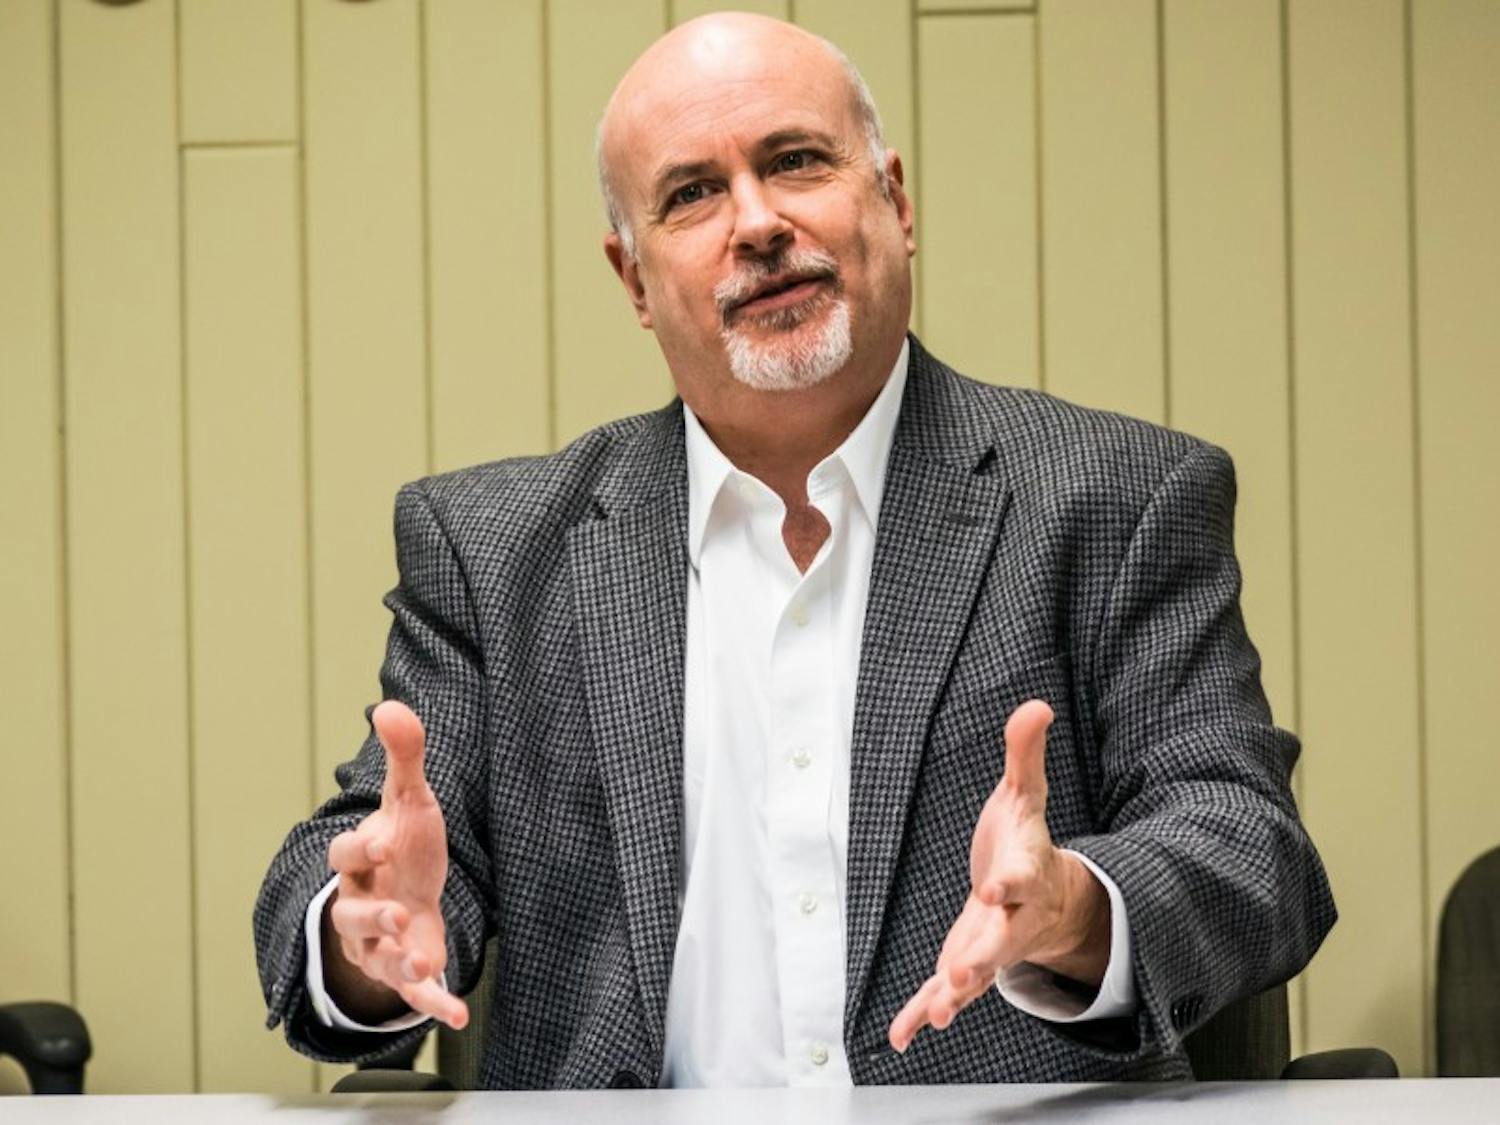 While home on congressional recess, U.S. Congressman Mark Pocan stopped by Vilas Hall for an interview with The Daily Cardinal to discuss national and state politics before his town hall later that day.